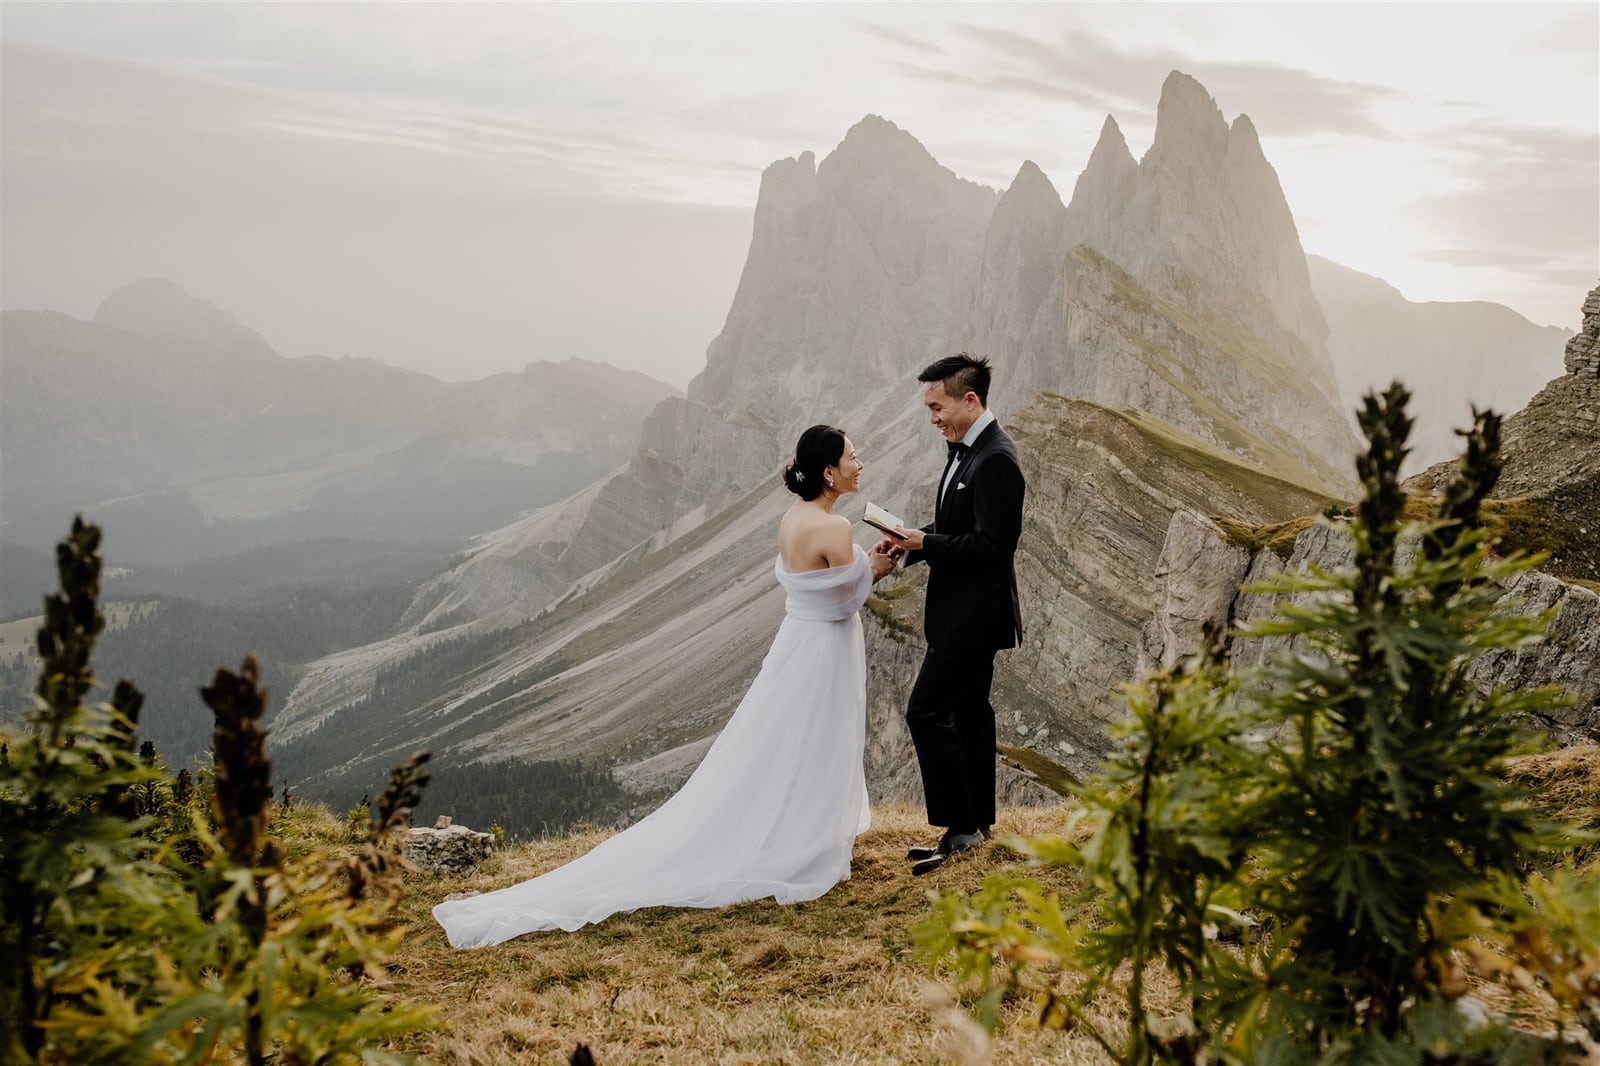 Asian bride and groom read wedding vows to one another standing in a meadow of wildflowers with the Seceda mountain in the distance behind them